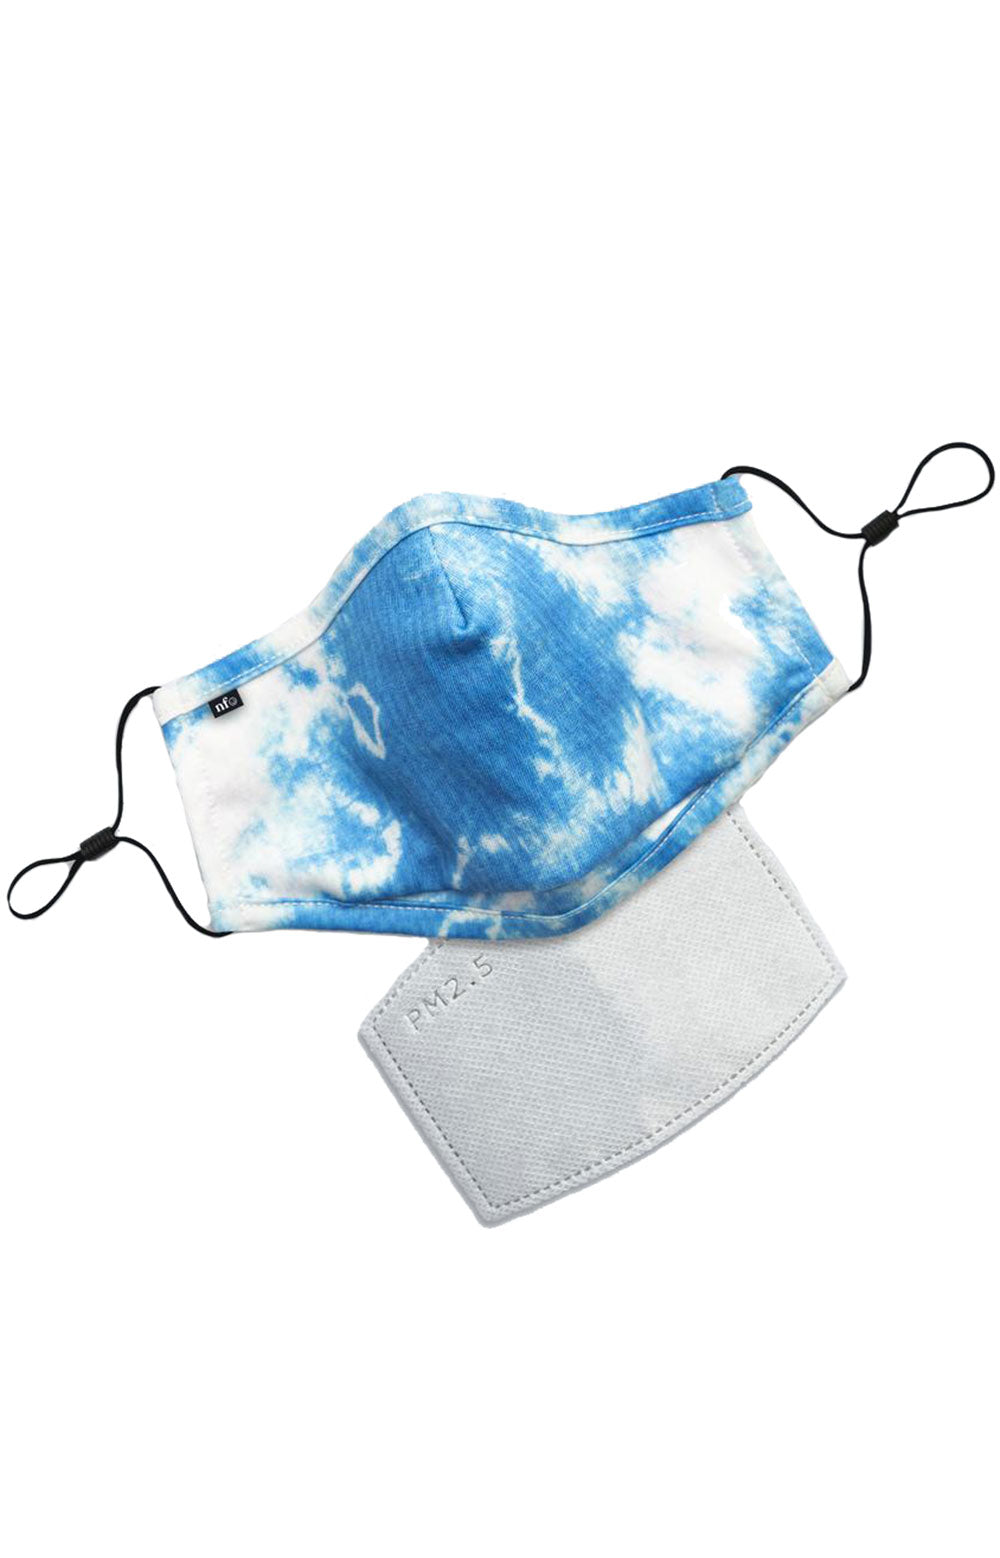 Adult Anti Bacterial Knit Face Mask - Blue Tie-Dye Print